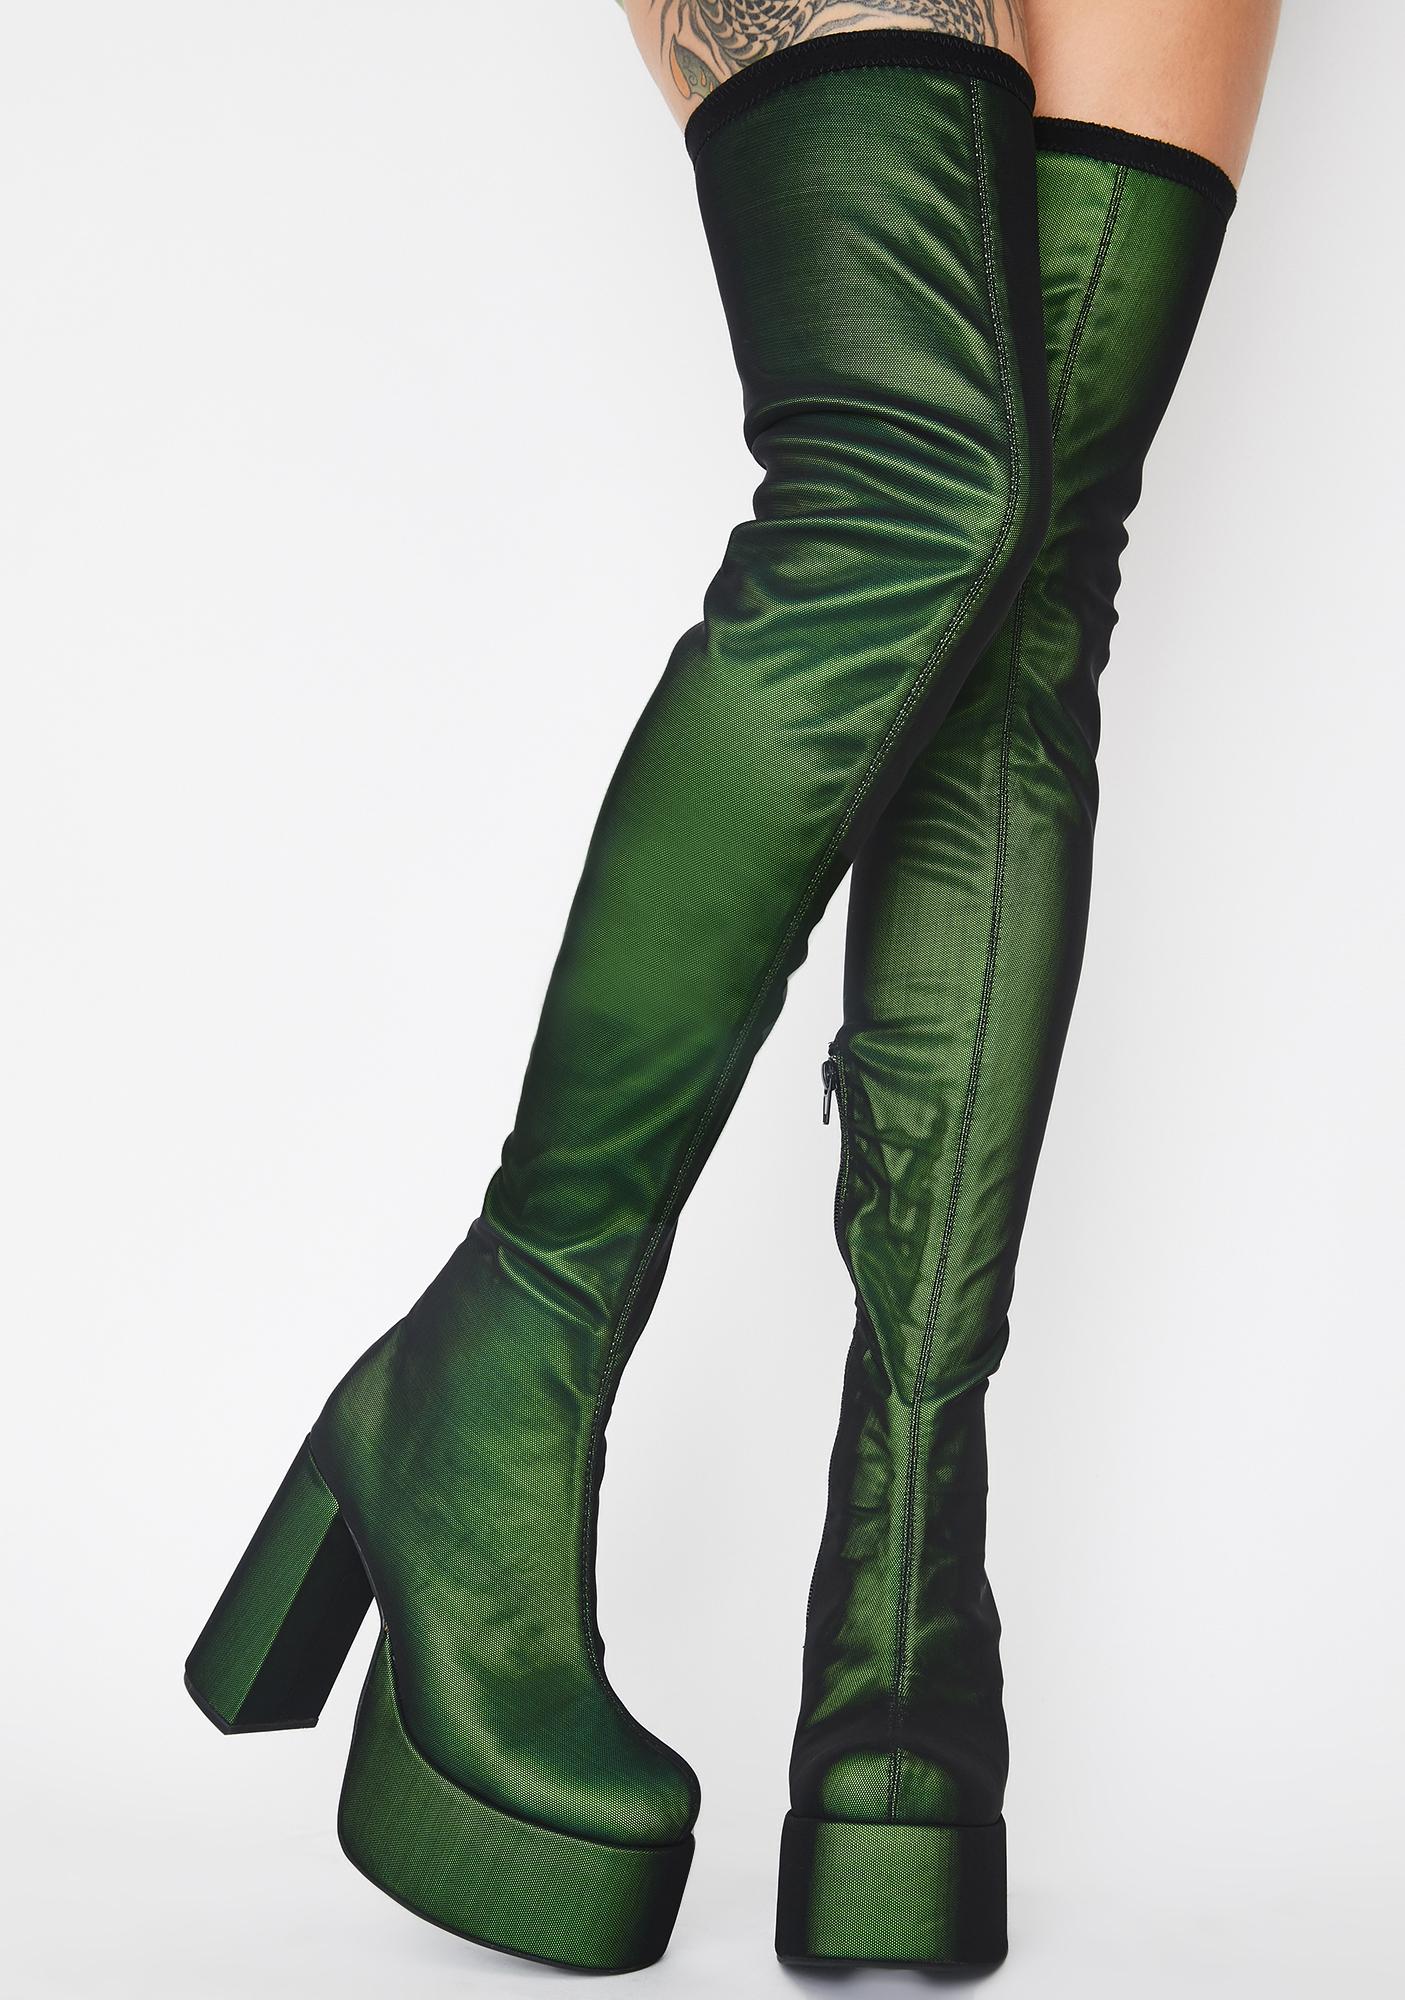 green thigh high boots outfit